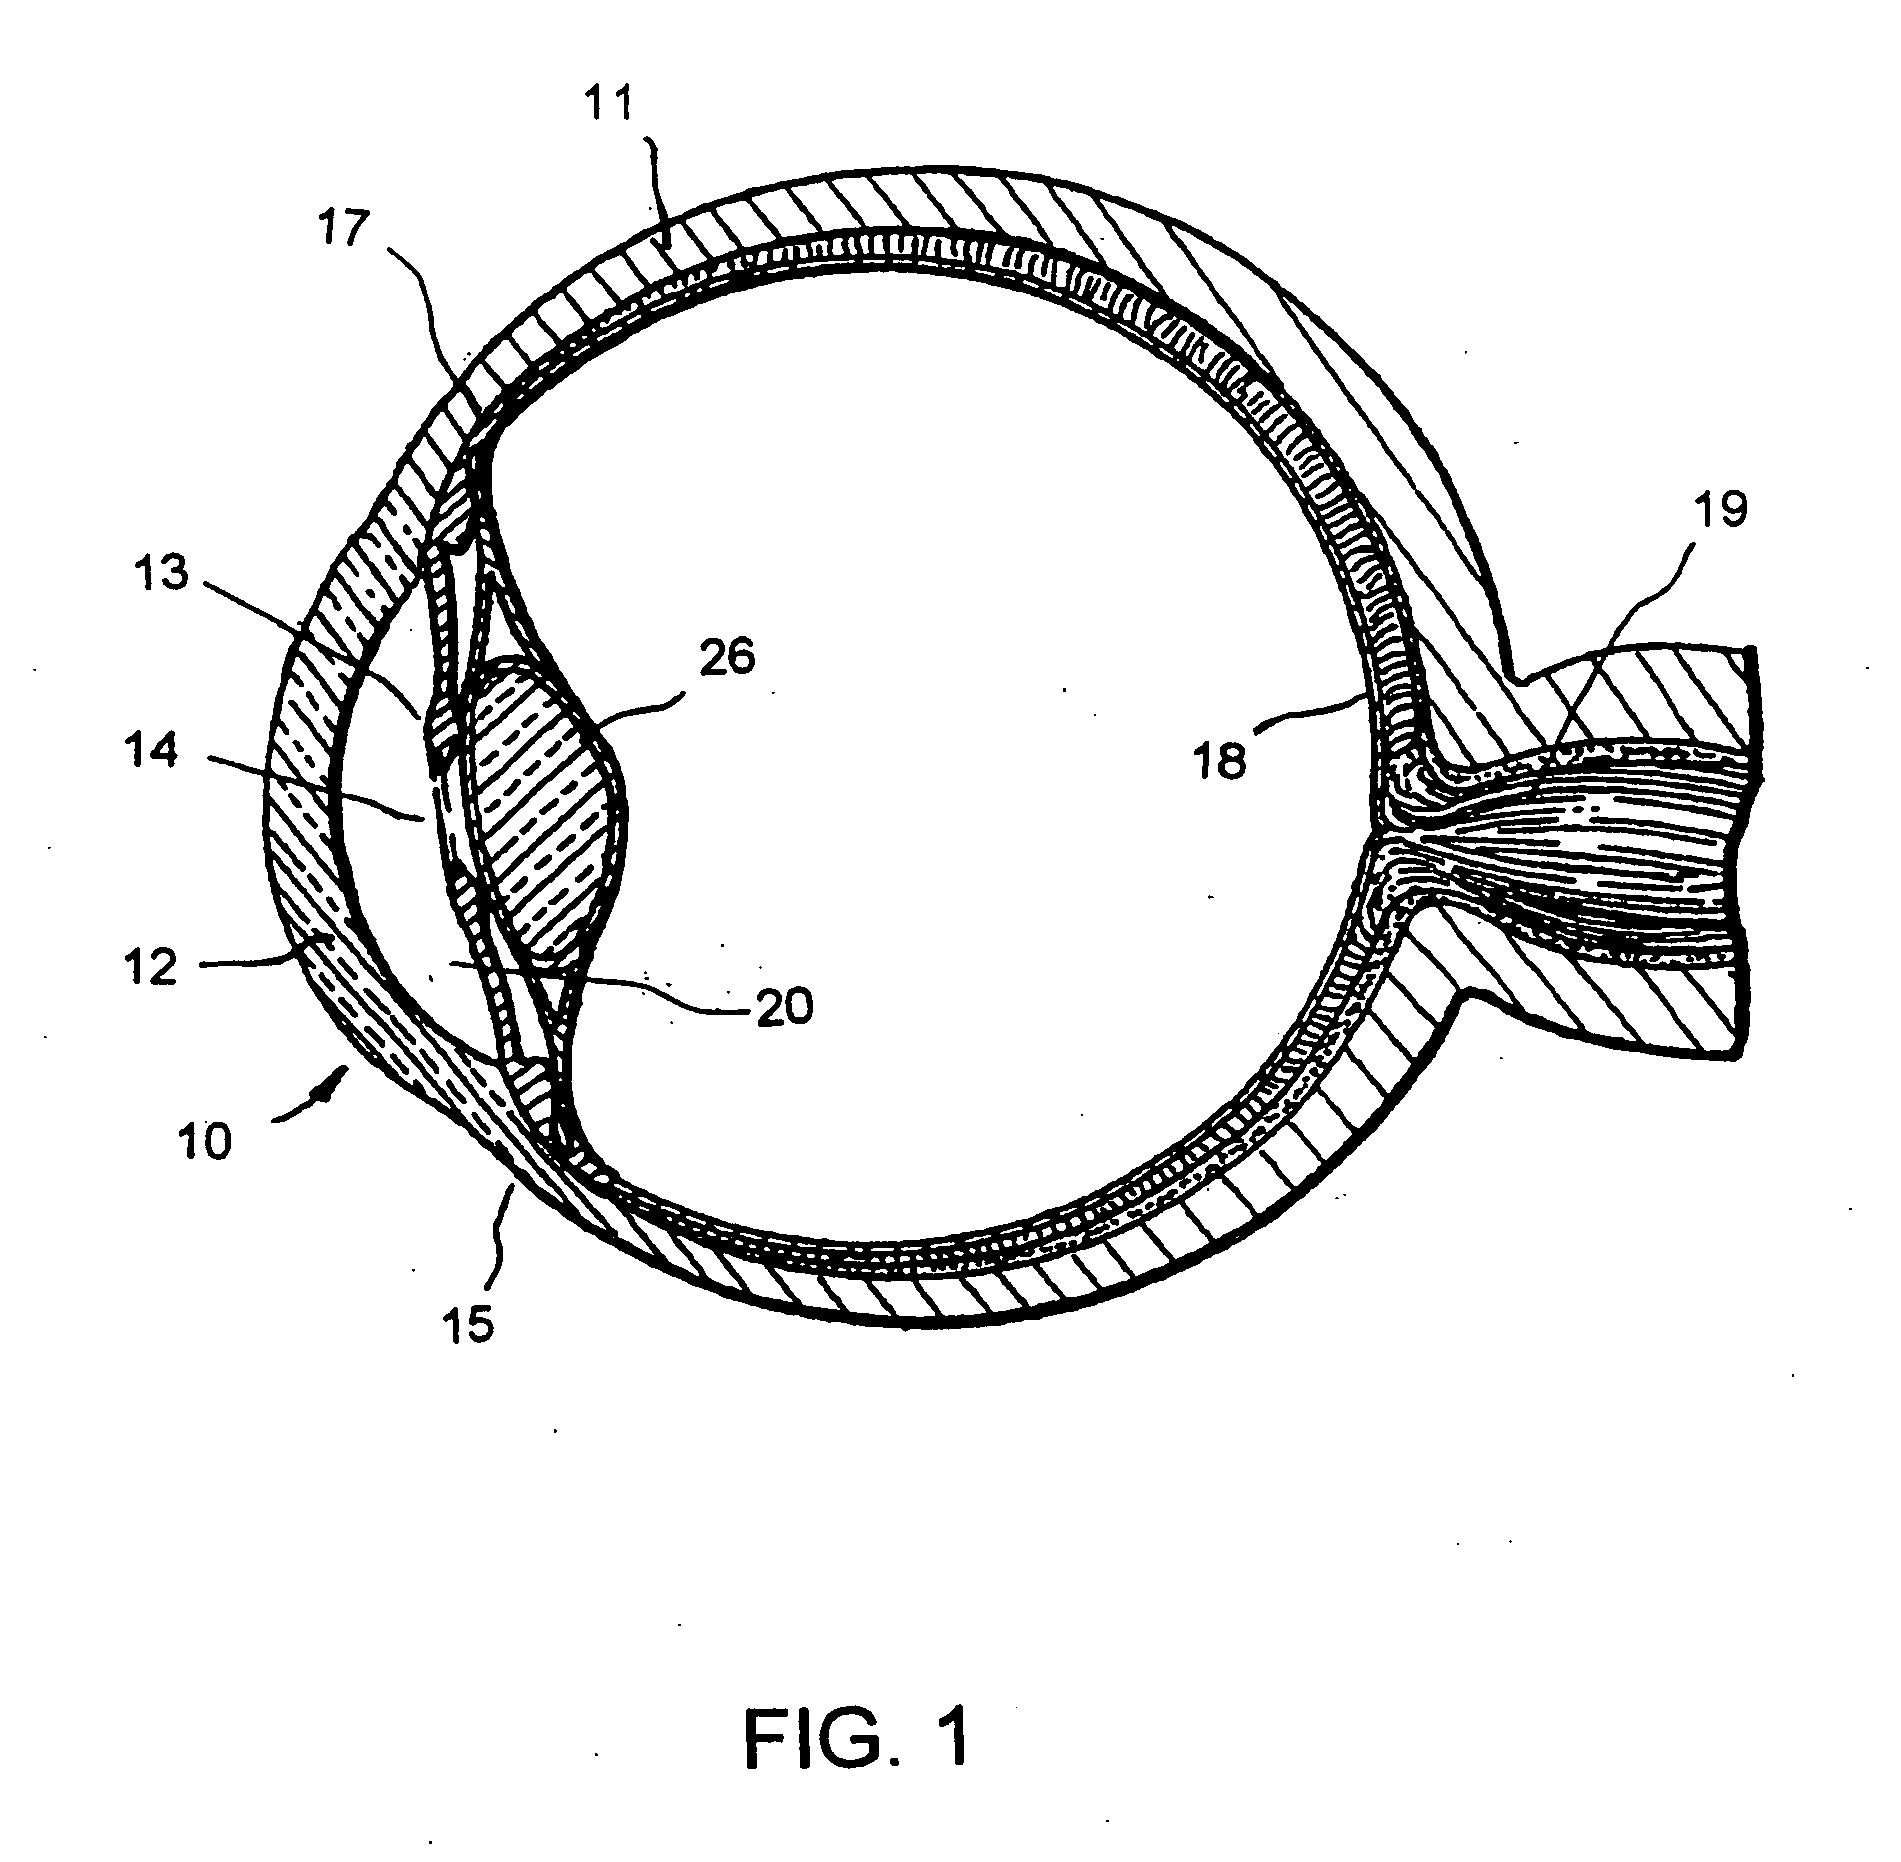 Ophthalmology implants and methods of manufacture